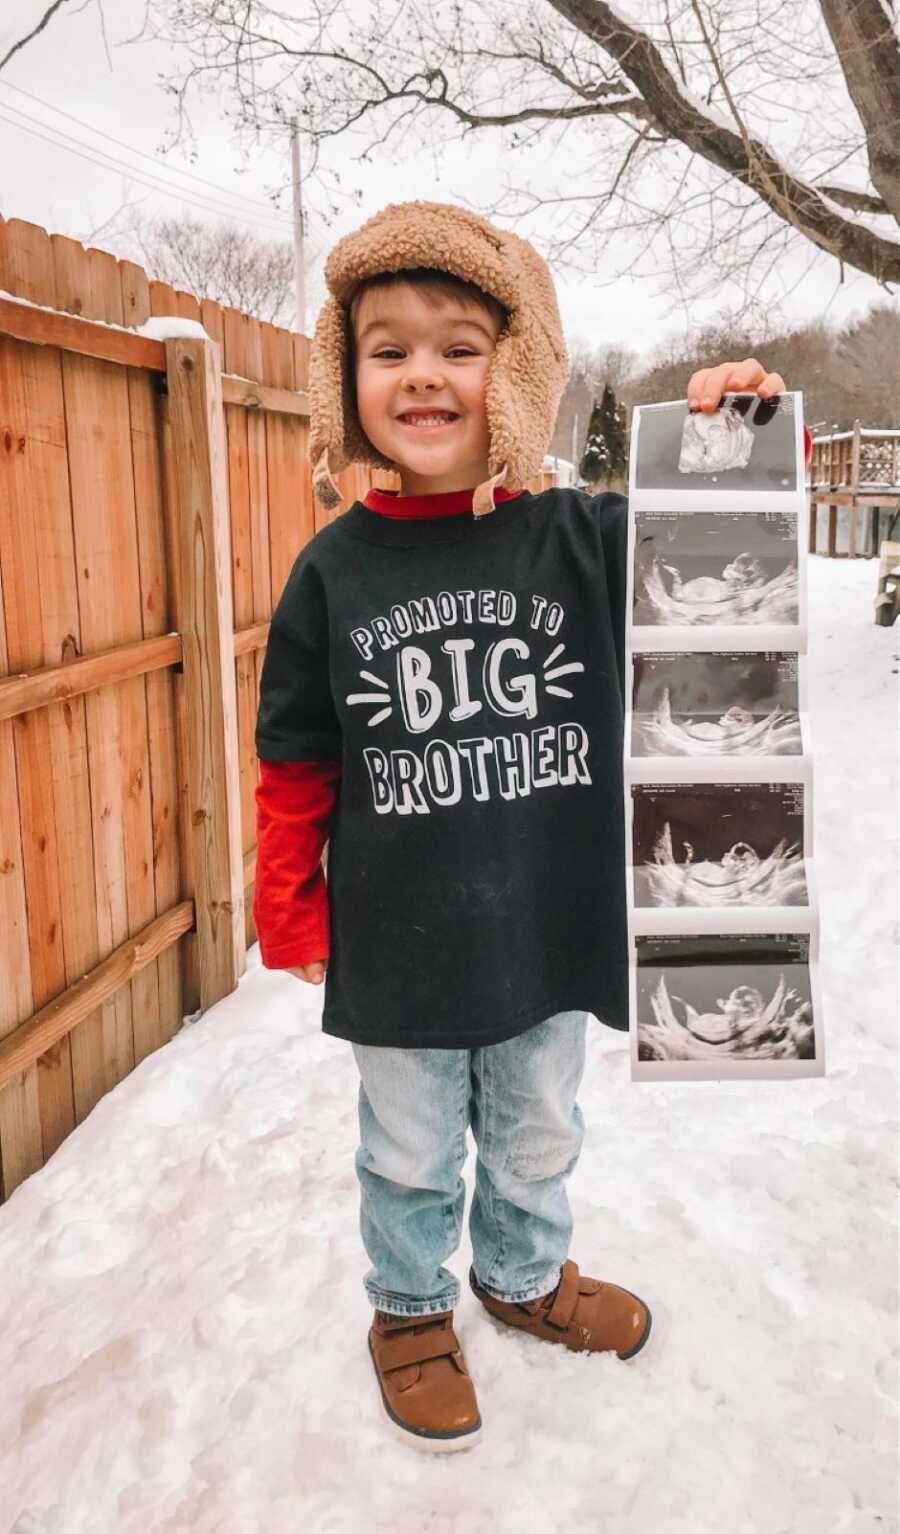 Little boy announces his mom's pregnancy by holding ultrasound photos while wearing a "promoted to big brother" T-shirt